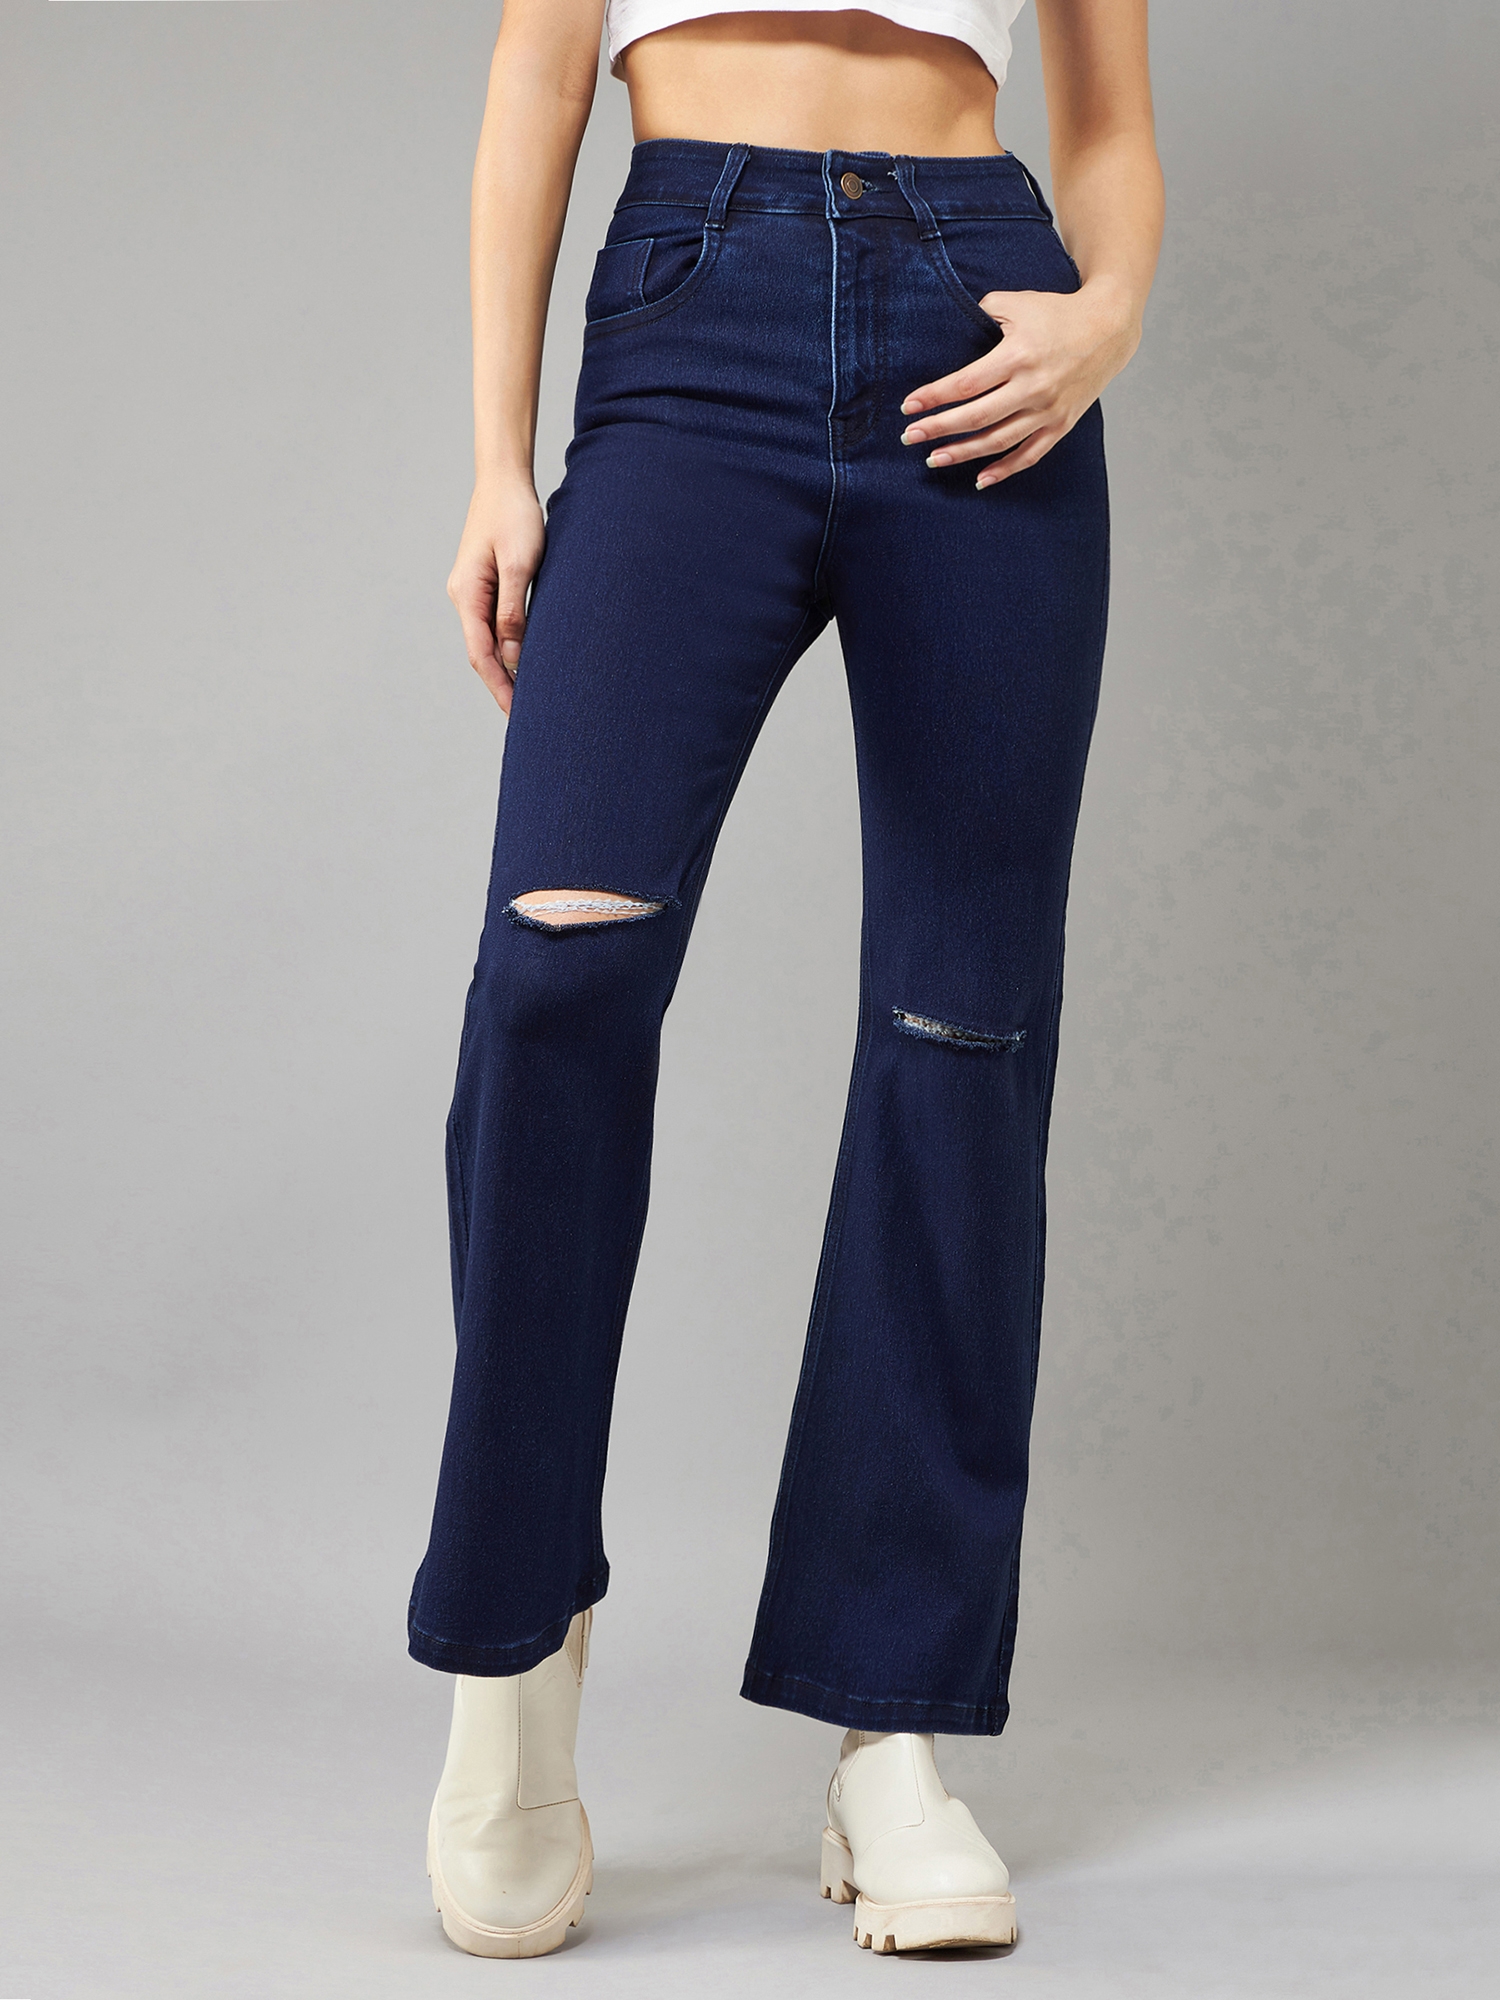 Buy DOLCE CRUDO Solid Denim Relaxed Fit Women's Casual Pants